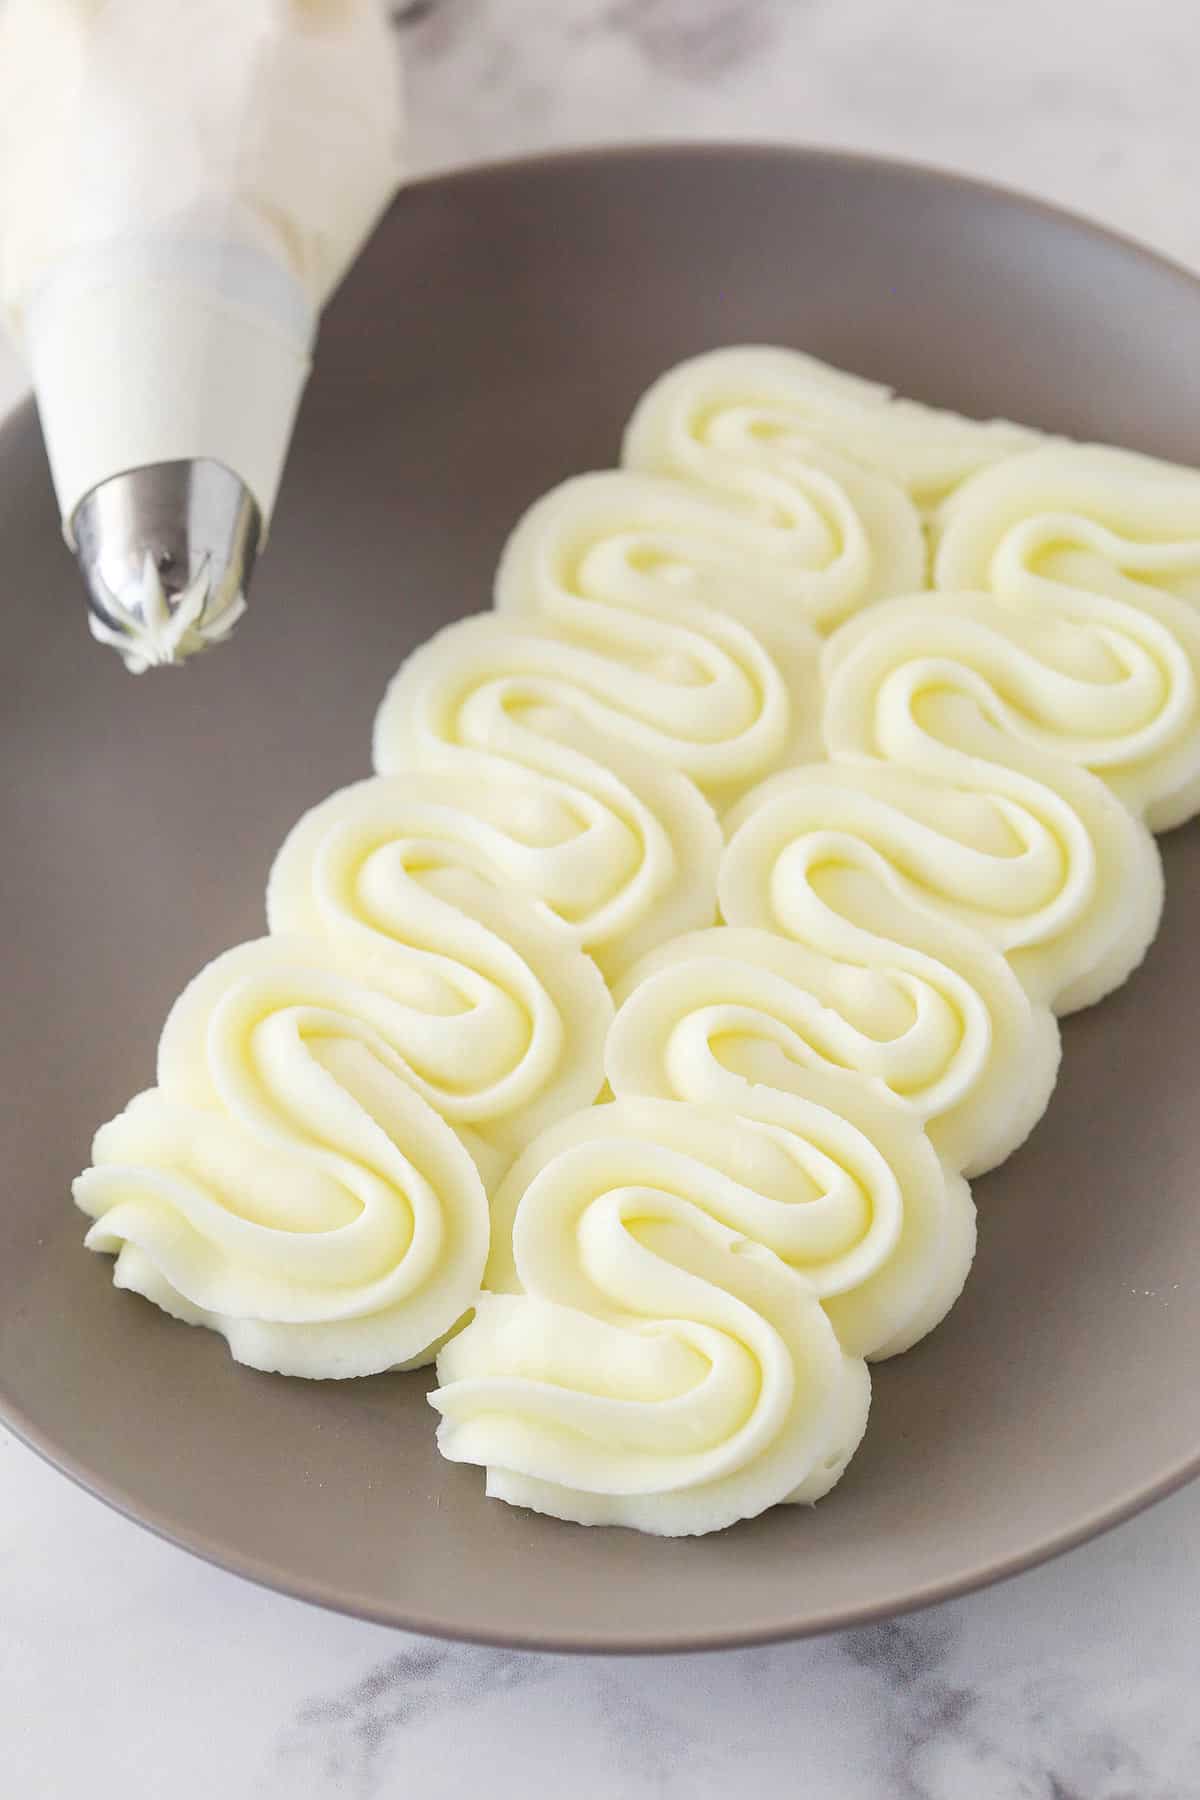 The Best Cream Cheese Frosting Recipe - Love, Life and Sugar